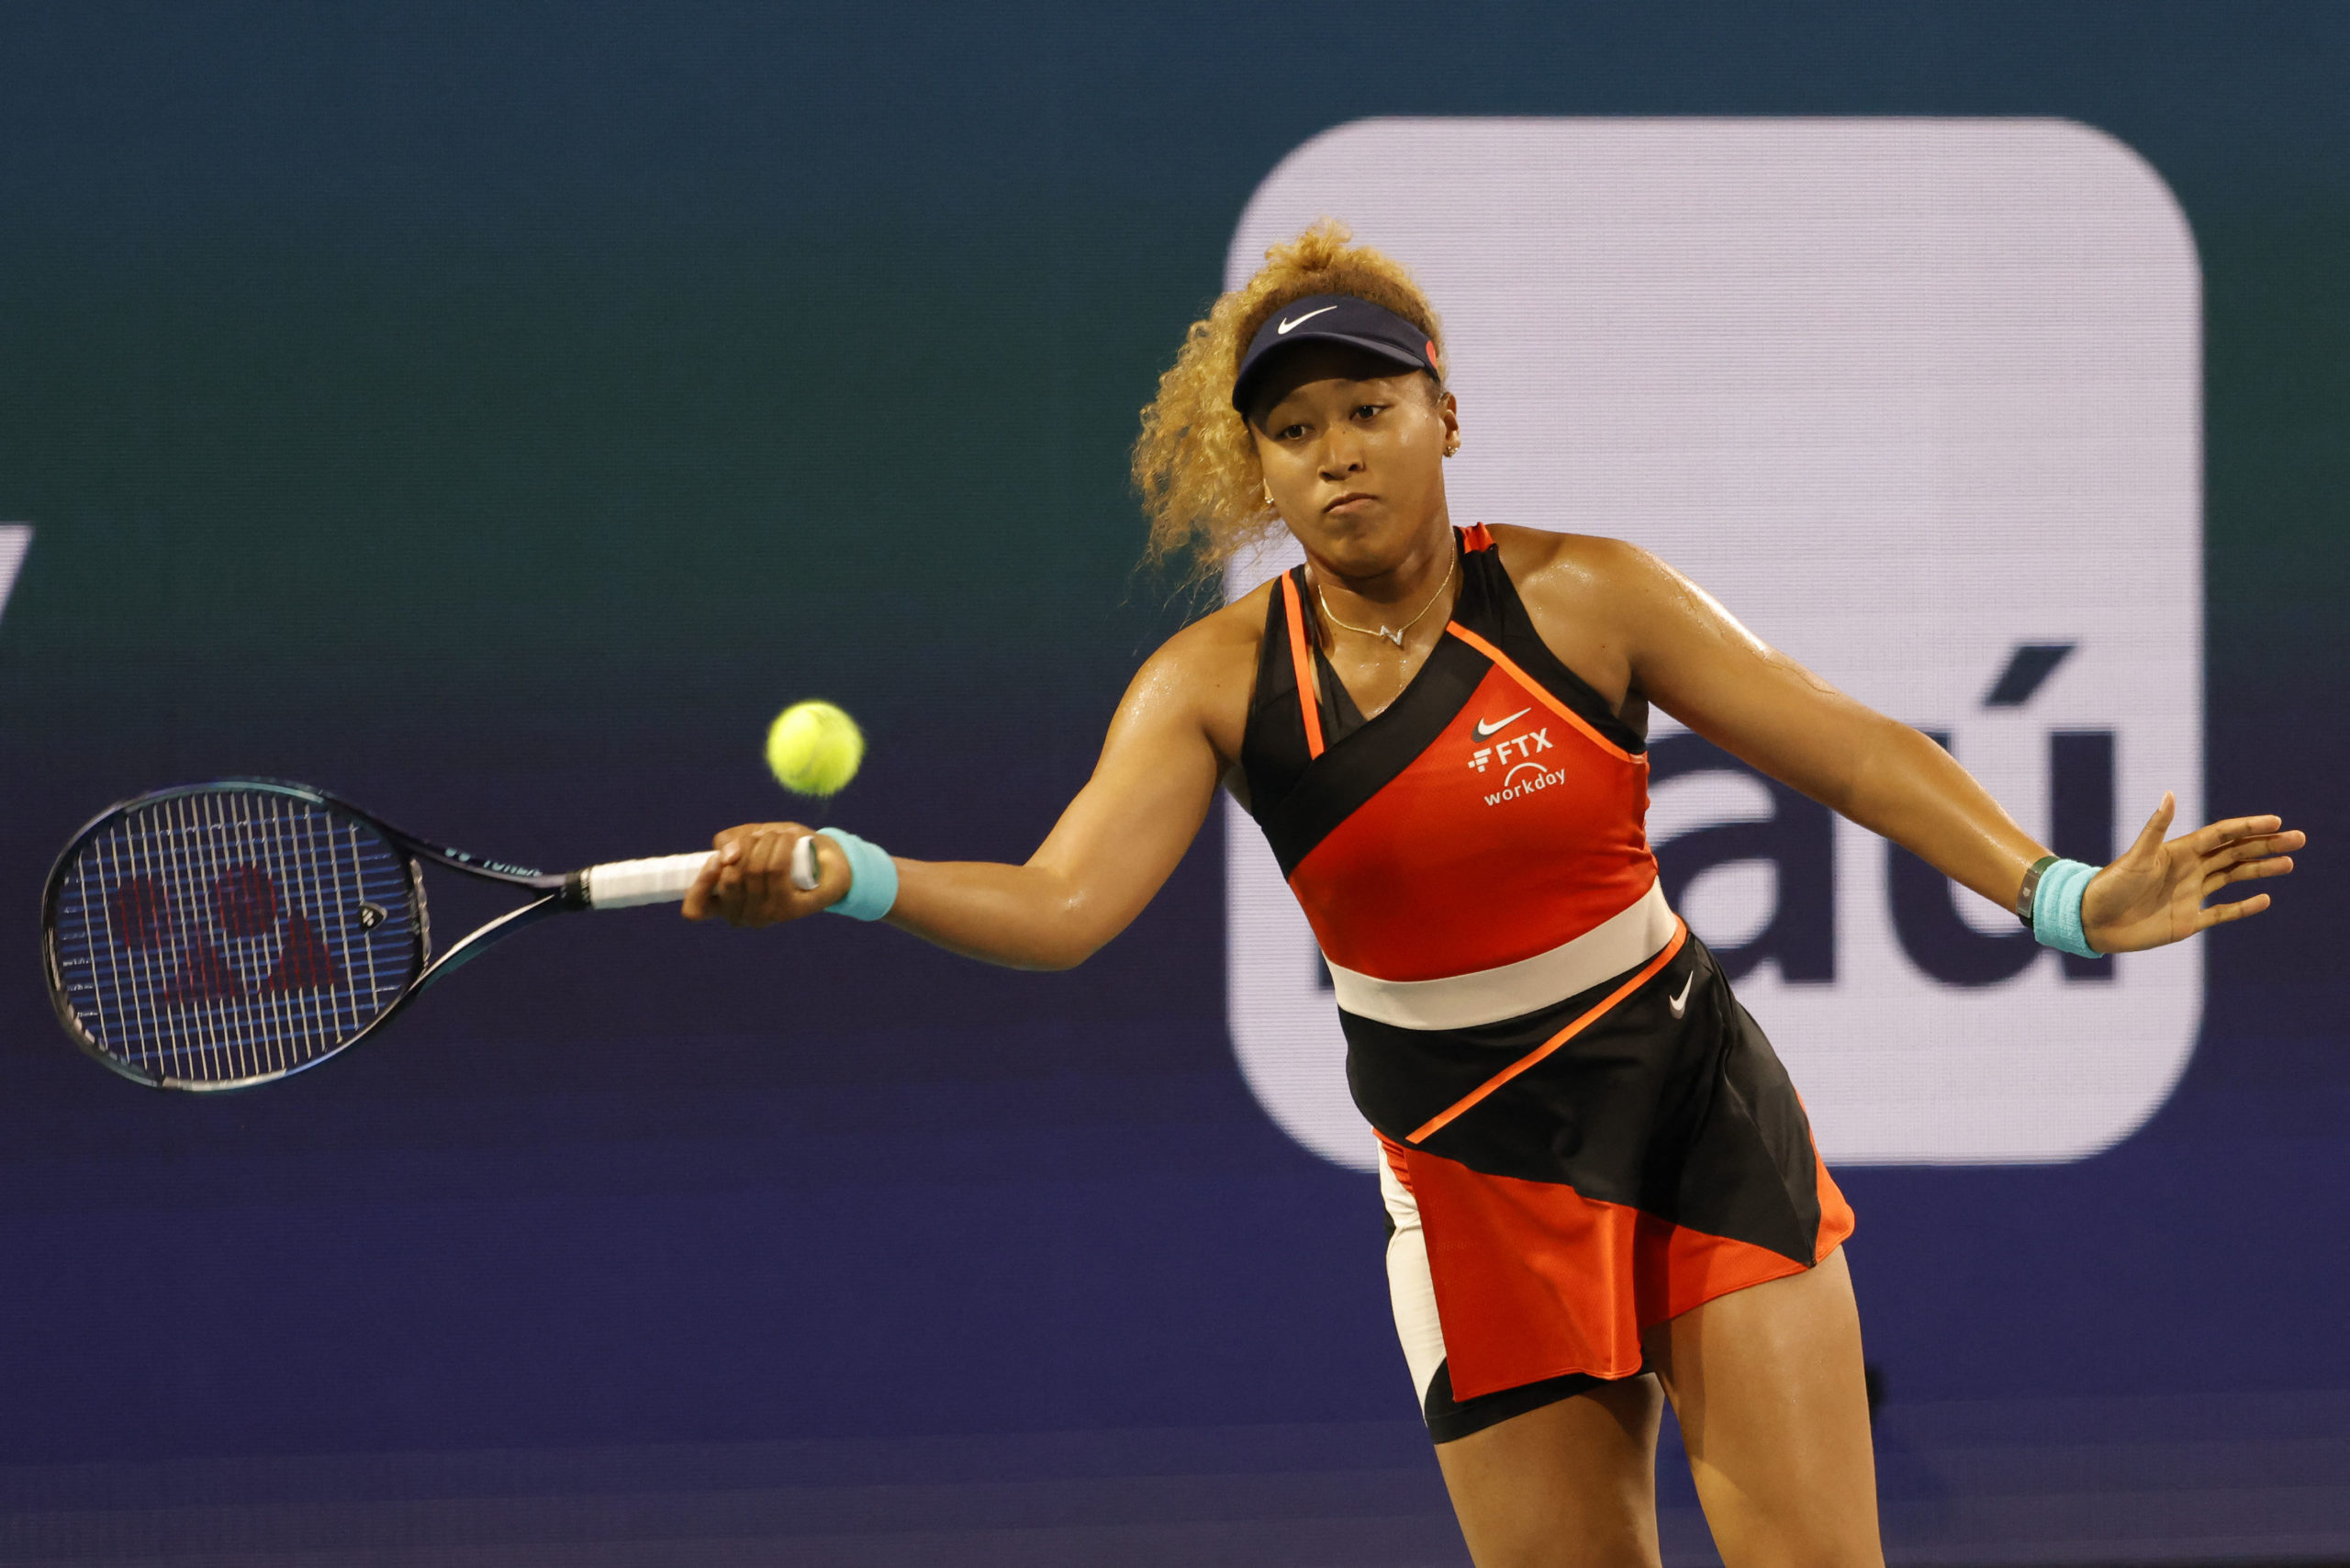 Mar 29, 2022; Miami Gardens, FL, USA; Naomi Osaka (JPN) hits a forehand against Danielle Collins (USA)(not pictured) in a women's singles quarterfinal in the Miami Open at Hard Rock Stadium.